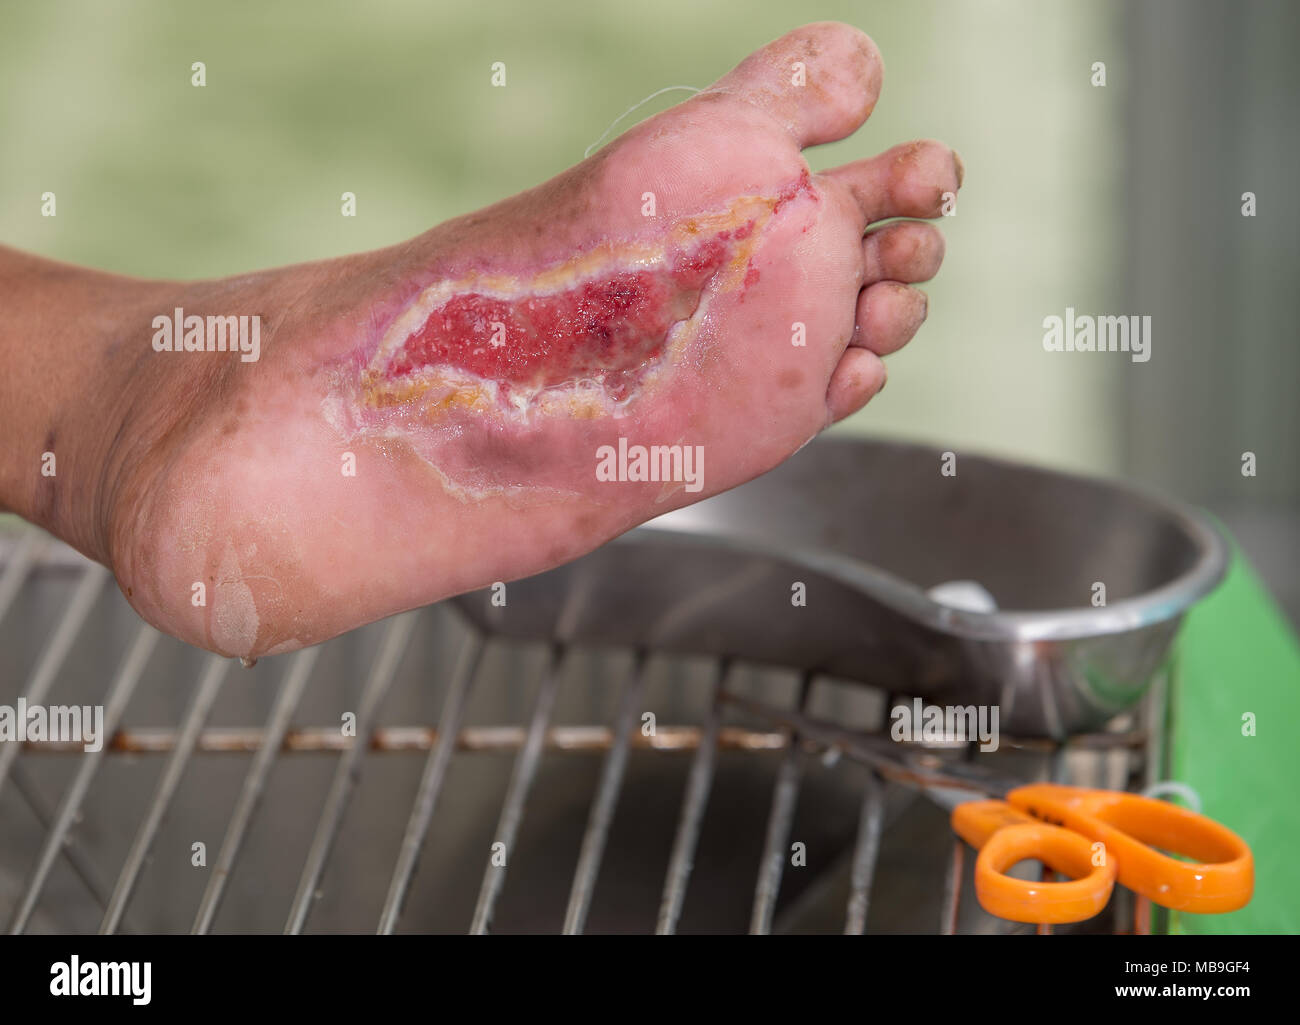 diabetes foot infection, DM patient have wound at arch of foot and chronic infection Stock Photo